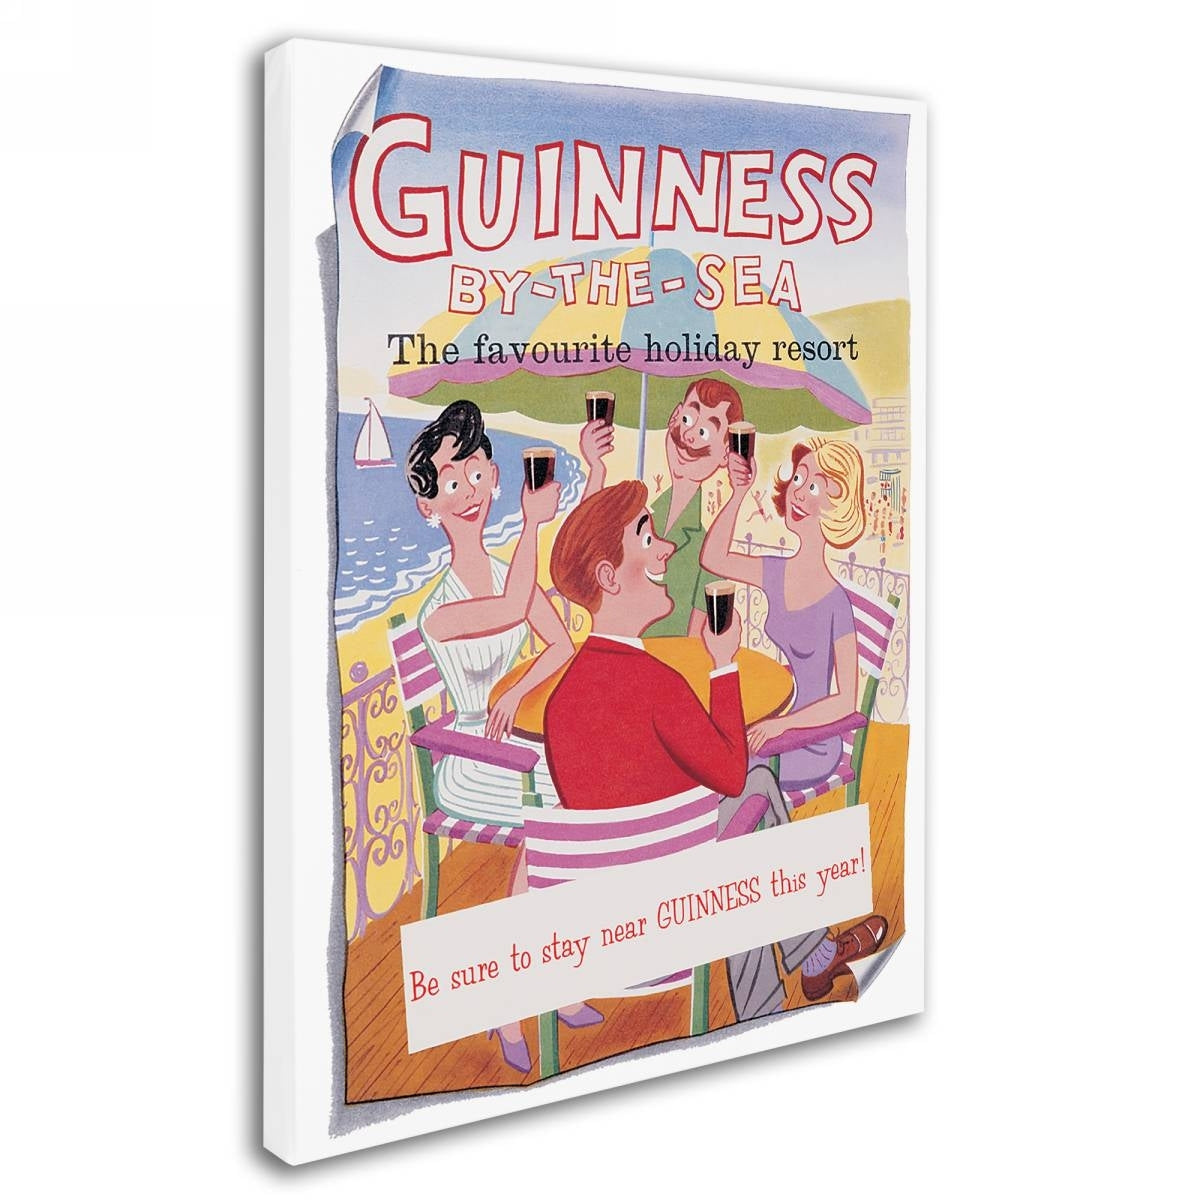 Vintage charm and Guinness Brewery 'Guinness By The Sea' Canvas Art come together in this captivating seaside canvas print.